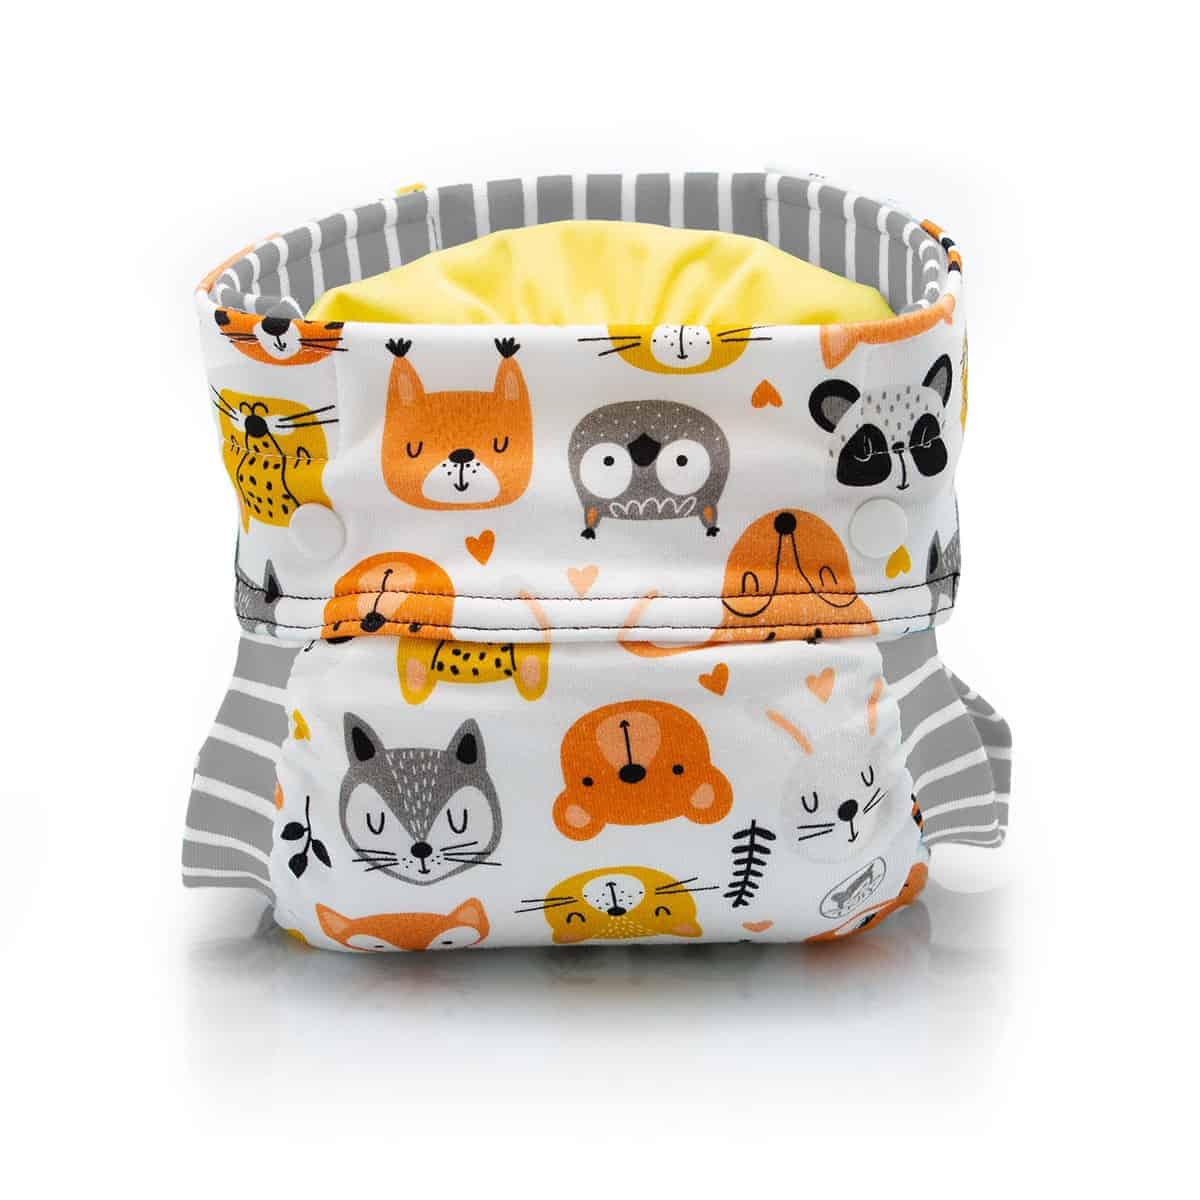 Bio Pants - Lovely faces - Cloth Nappies